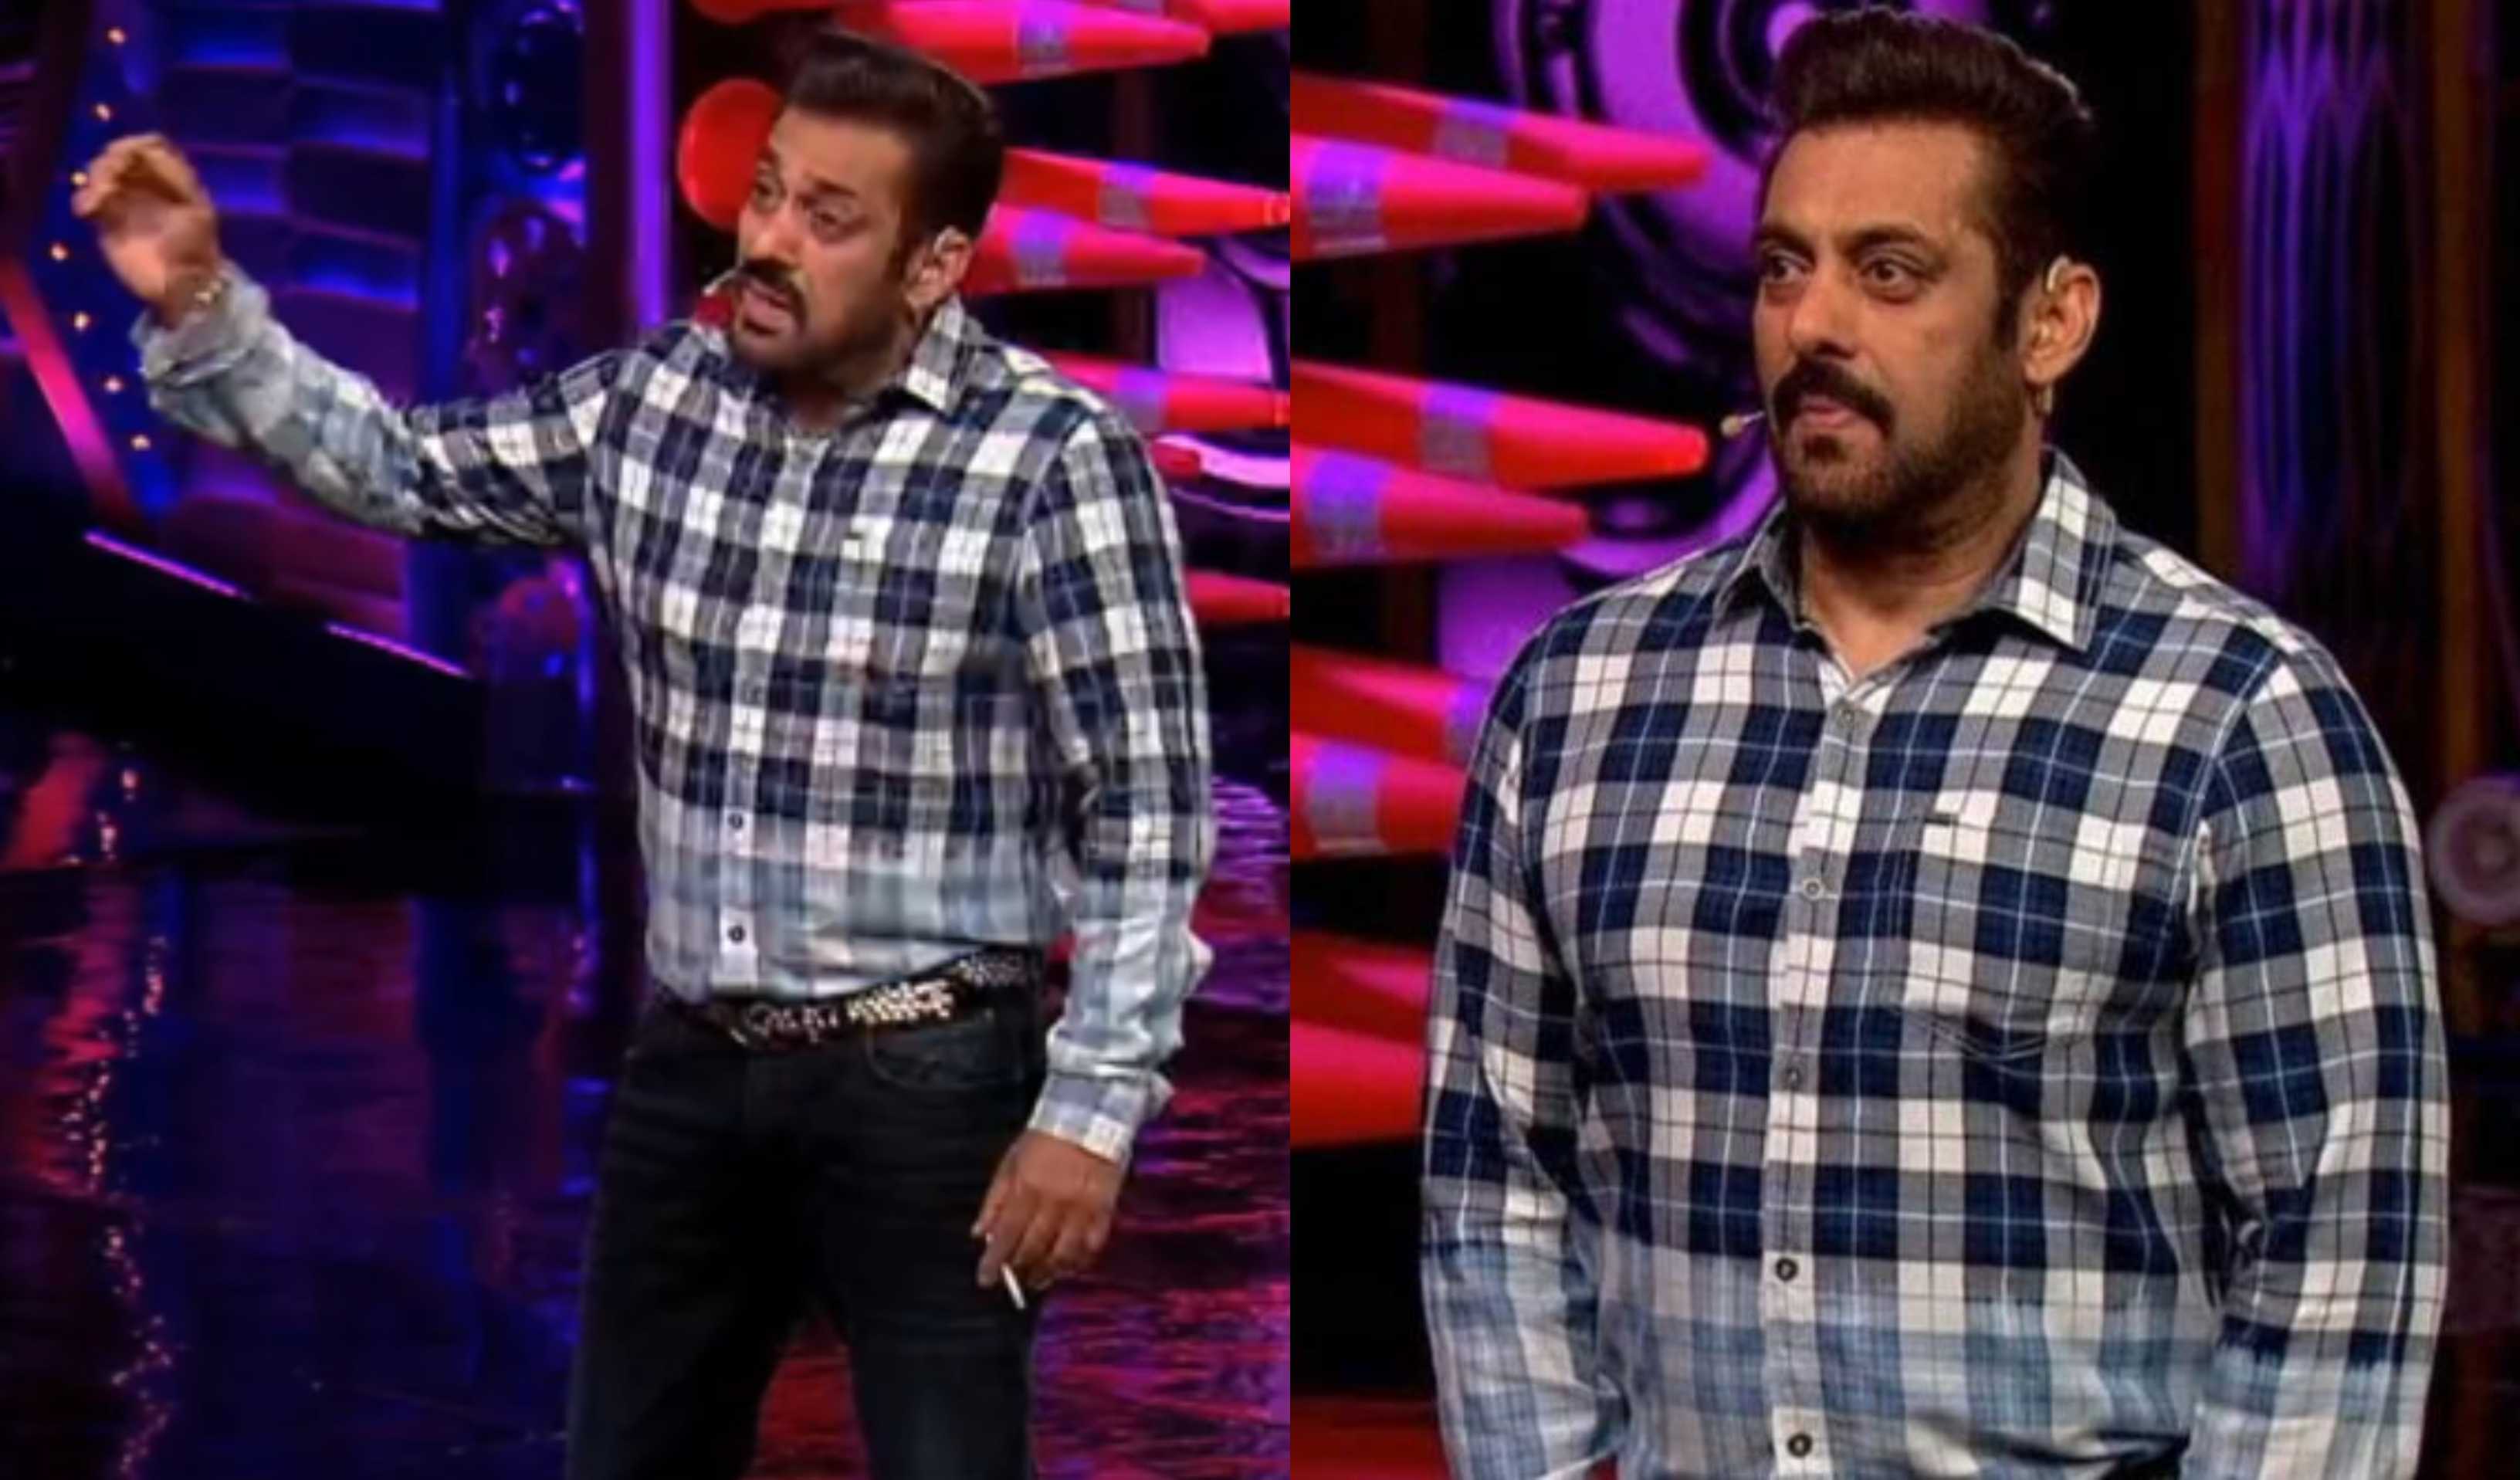 ‘We know he’s a hypocrite’: Salman Khan’s pic with a cigarette goes viral from Bigg Boss OTT 2, trolls have a field day